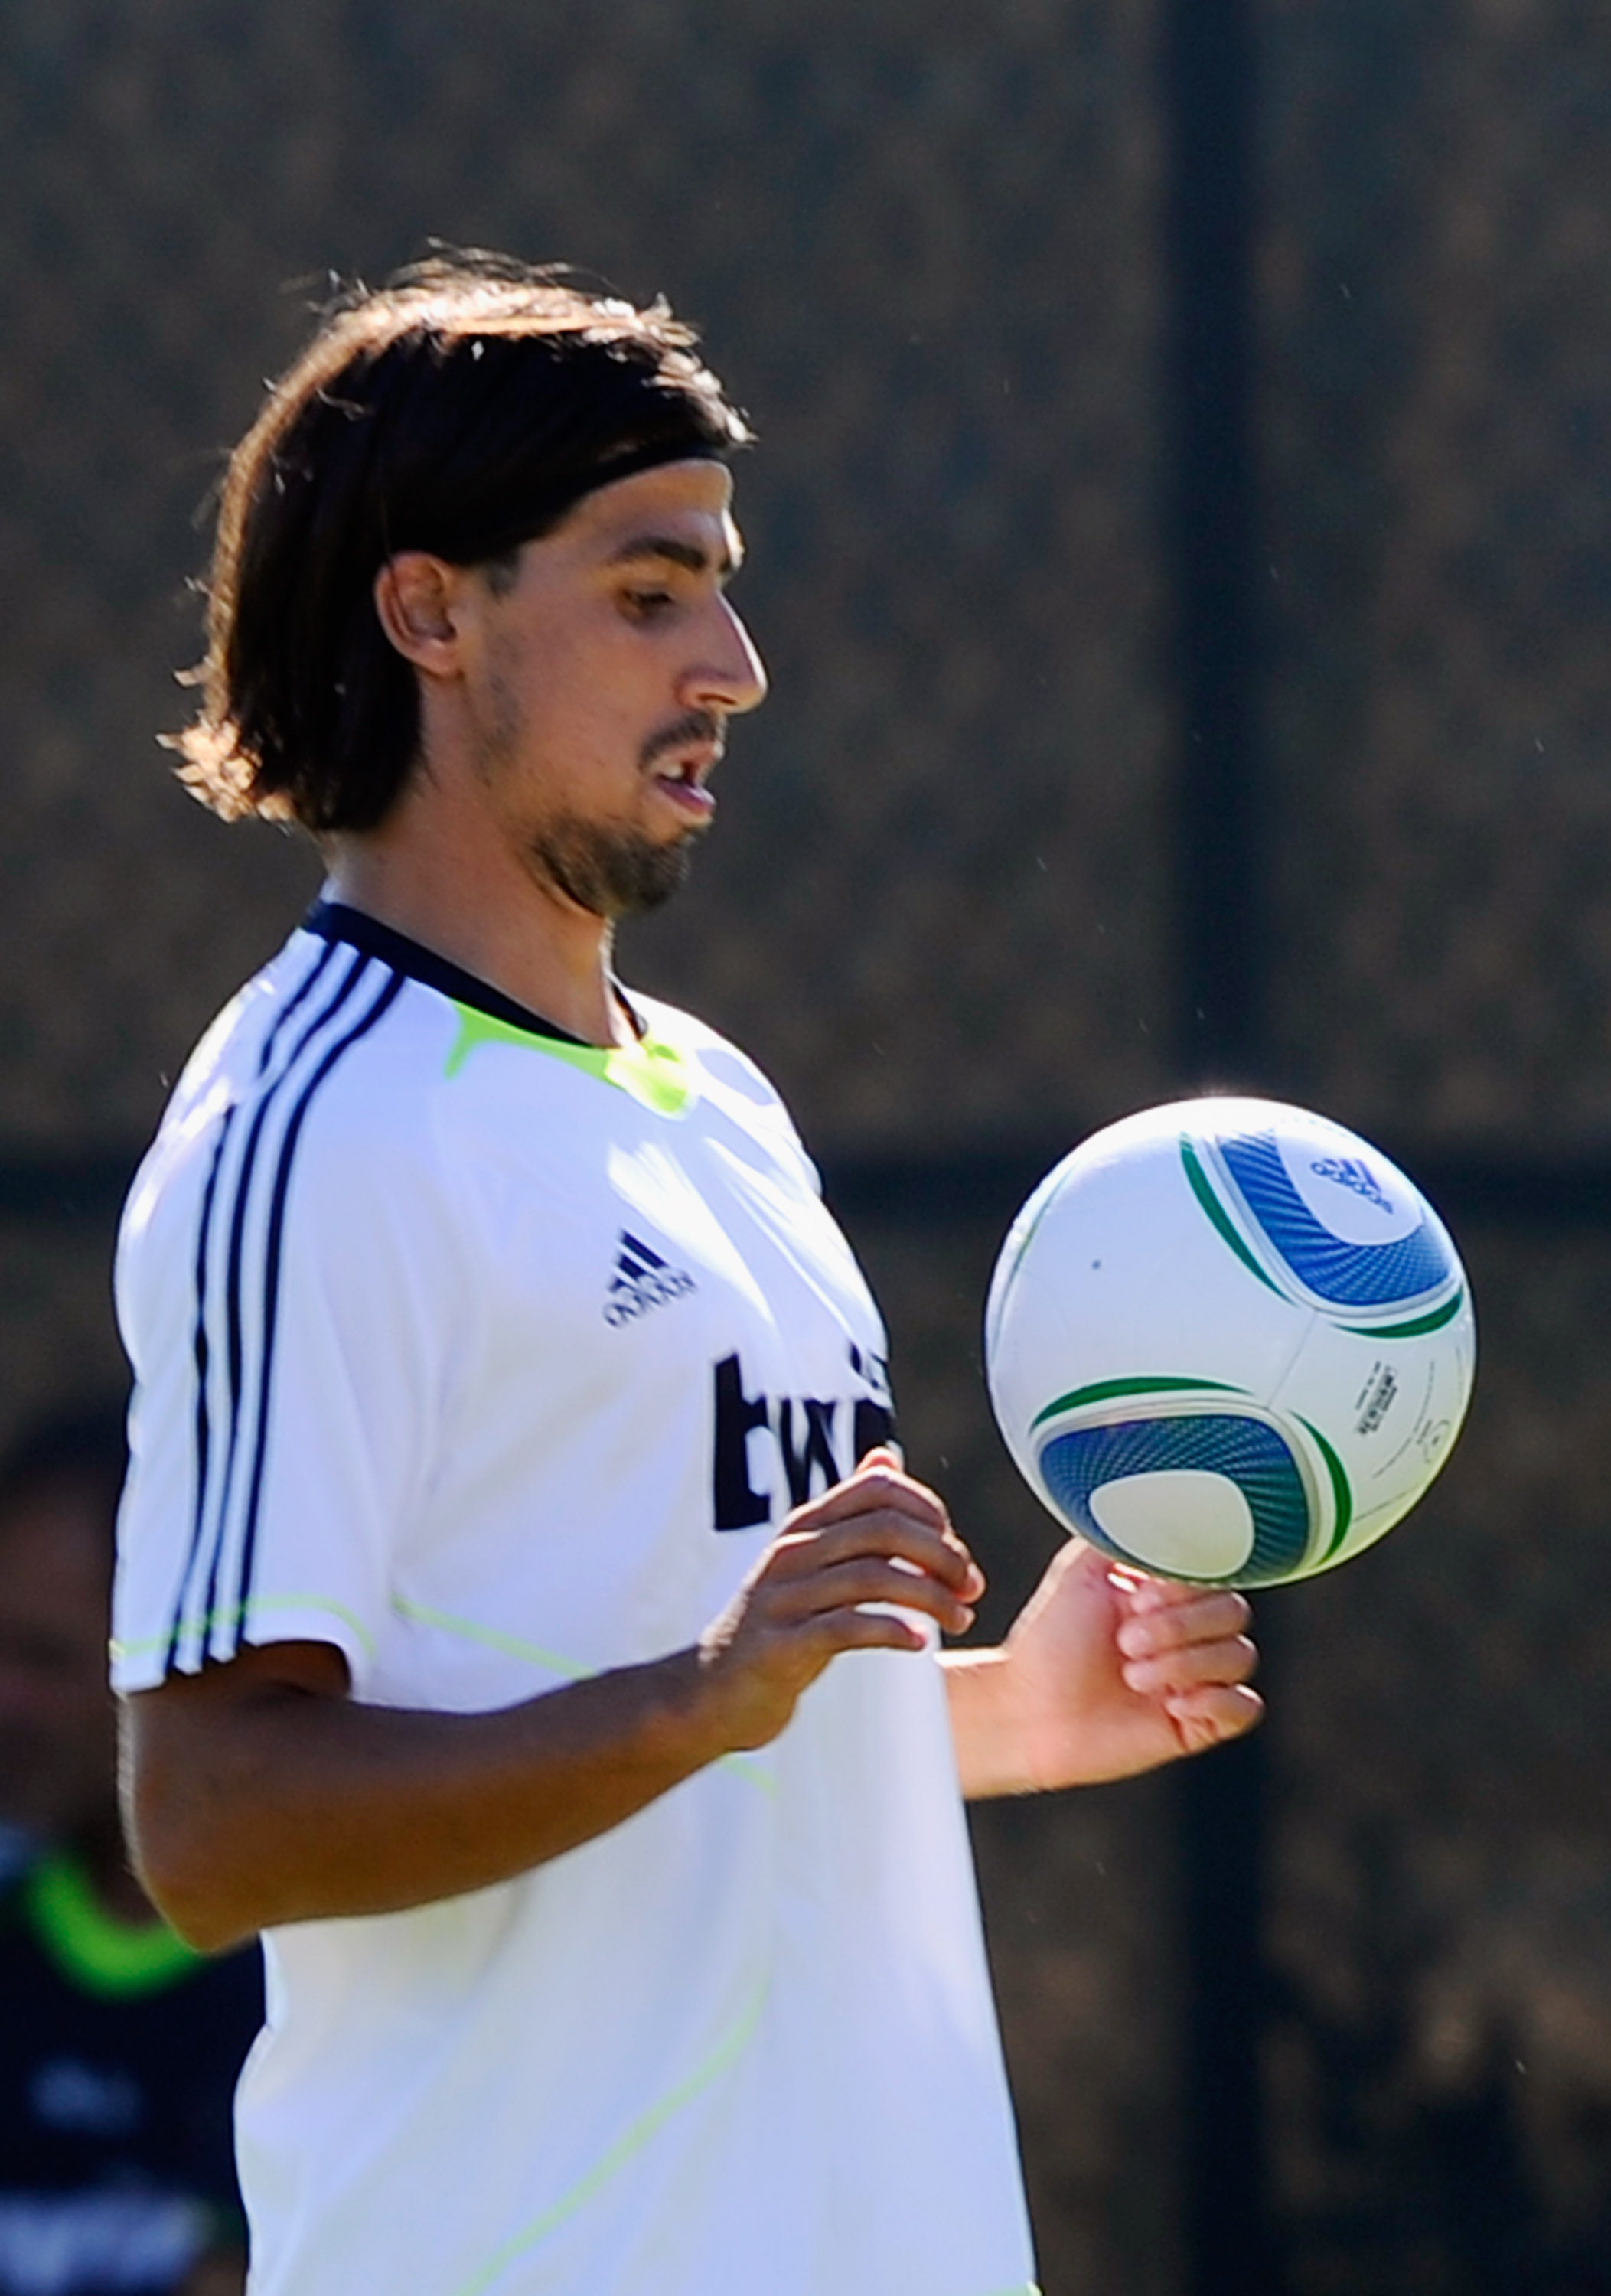 LOS ANGELES, CA - AUGUST 03:  Sami Khedira of Real Madrid controls the ball during training session on the campus of UCLA on August 3, 2010 in Los Angeles, California. Real Madrid will play Club America of Mexico in San Francisco, California, on August 4 